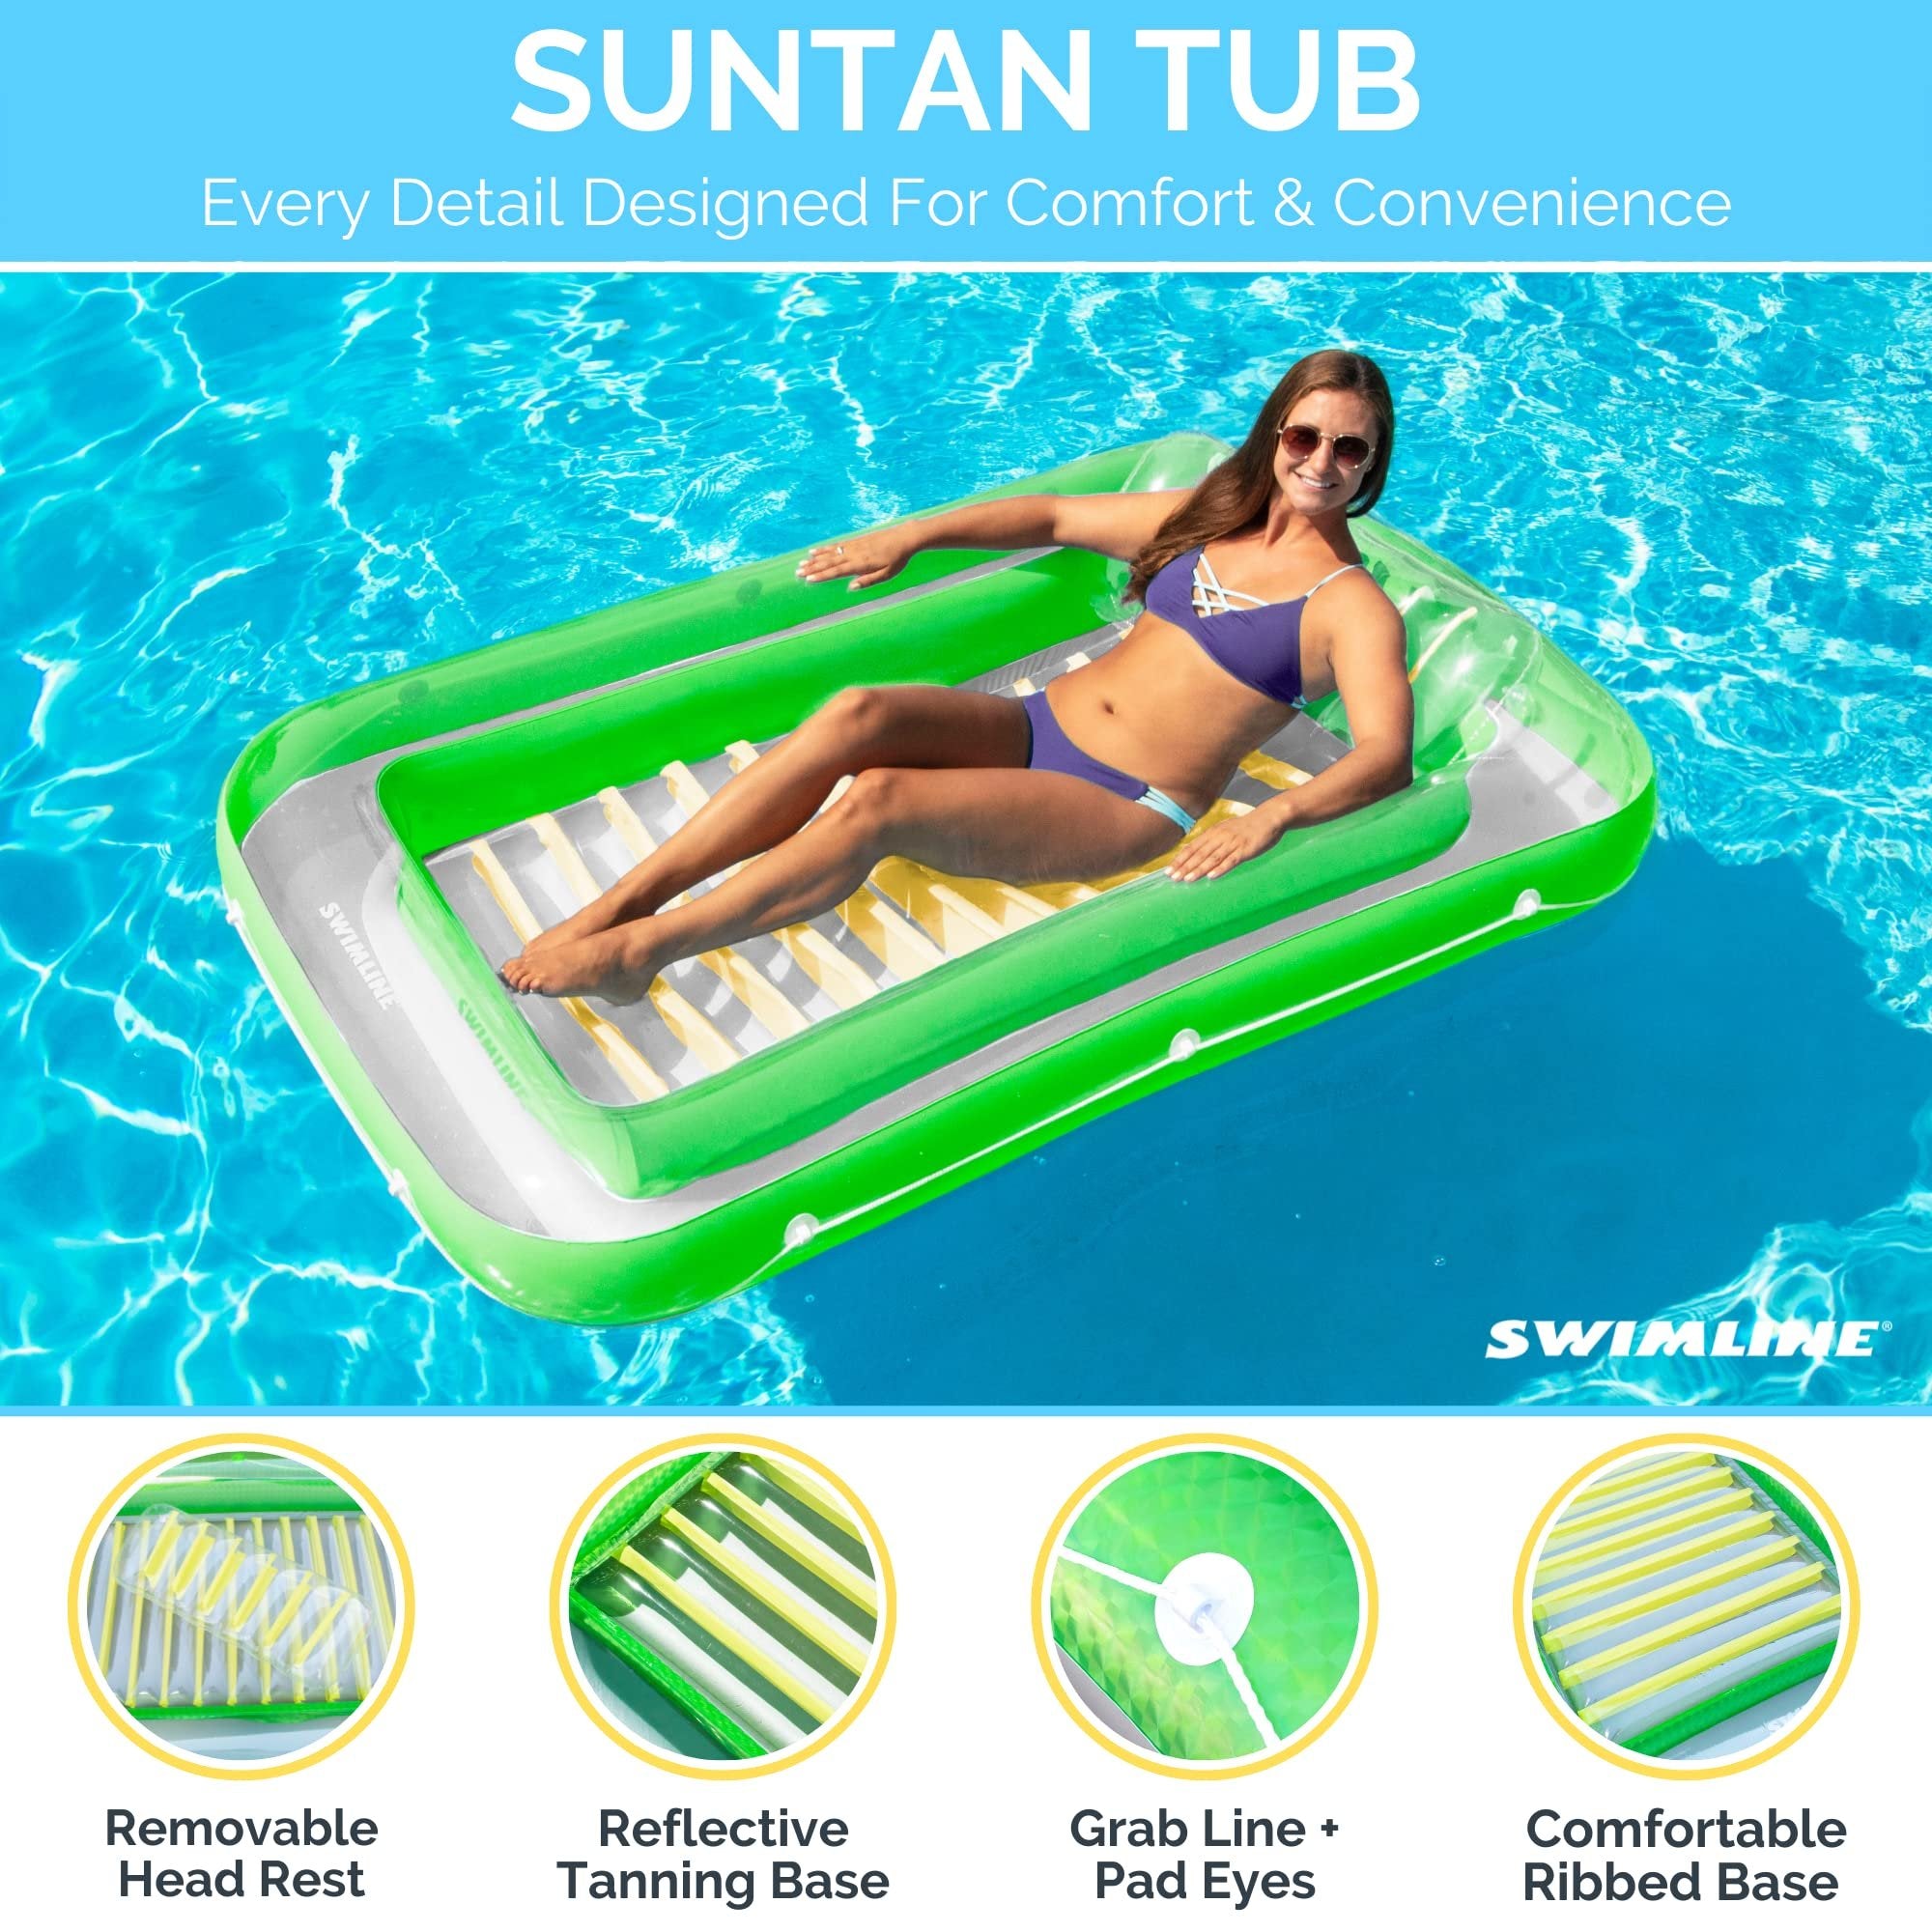 SWIMLINE Original Suntan Tub Classic Edition Inflatable Floating Lounger Green and Yellow | Tanning Pool Hybrid Lounge